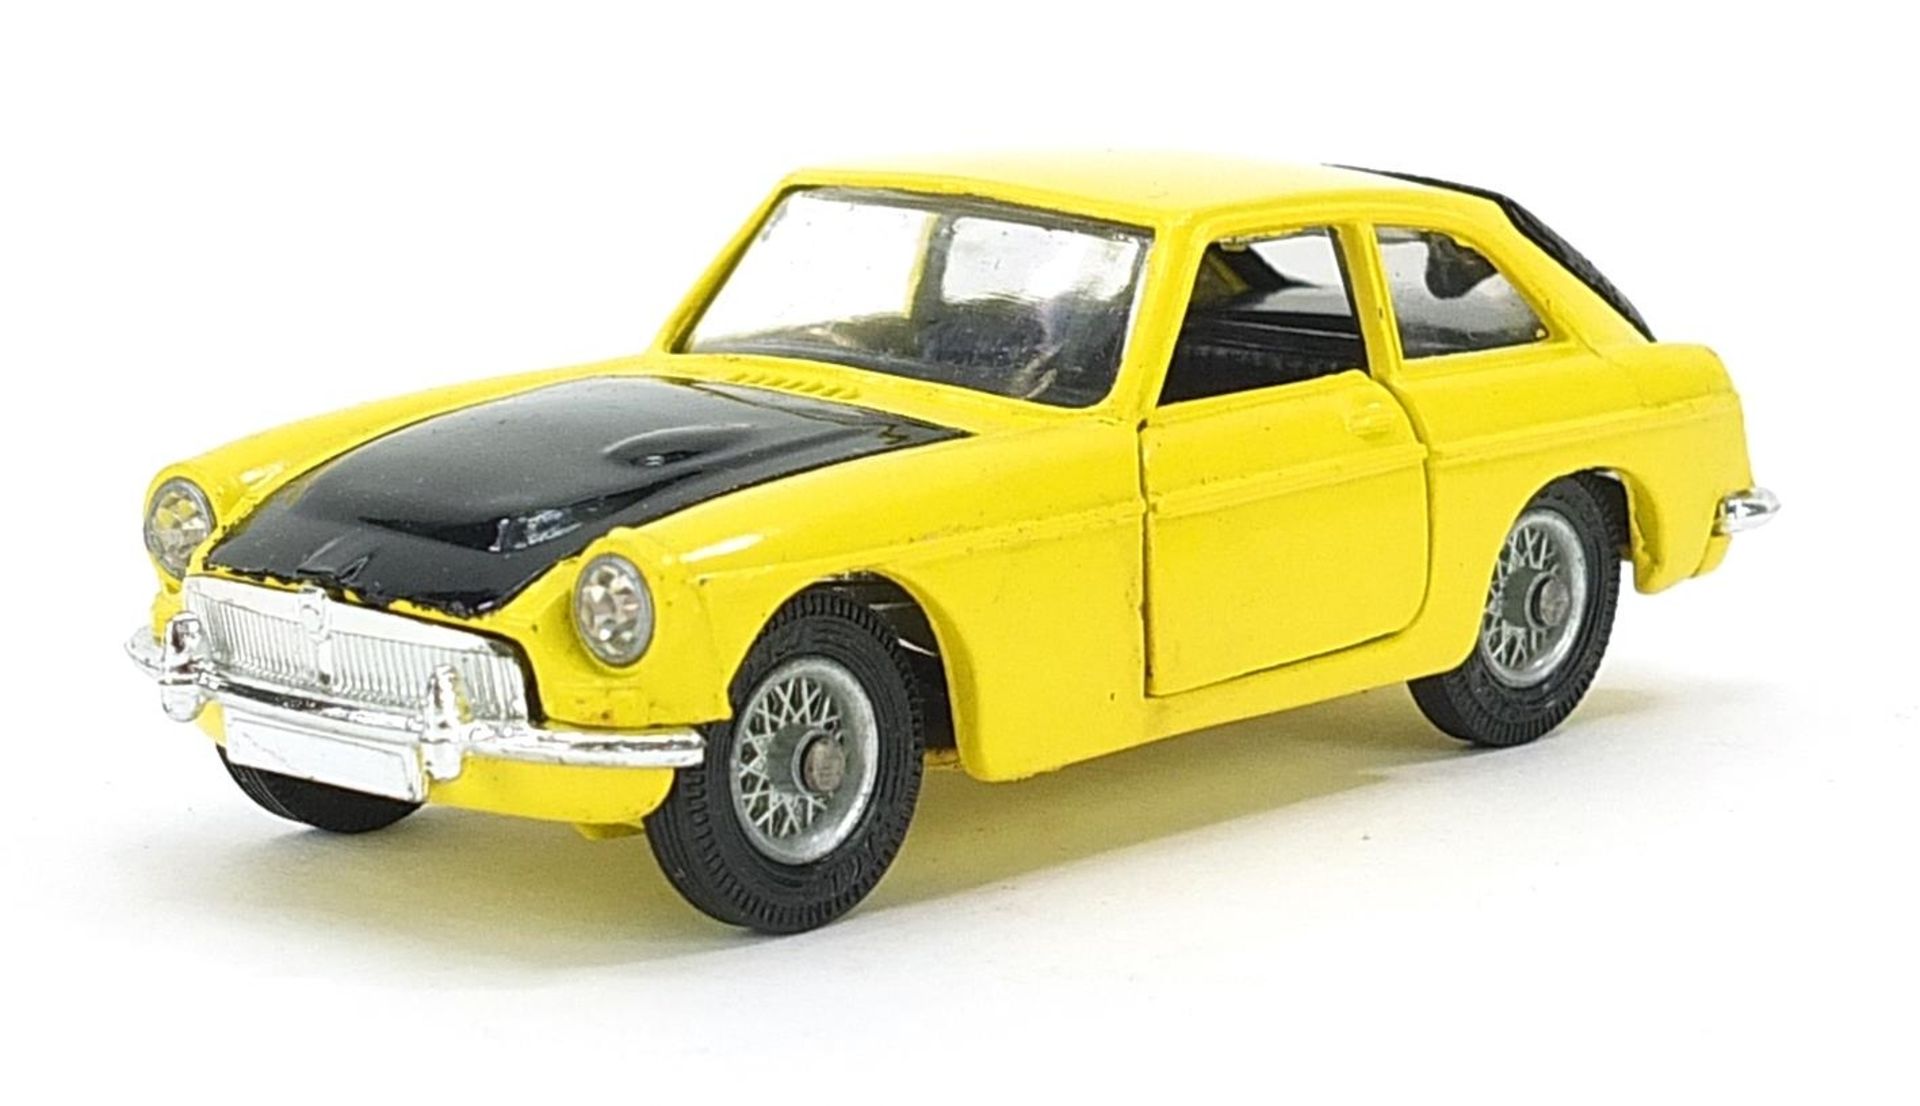 Corgi diecast competition model MGC GT with box - Image 2 of 4